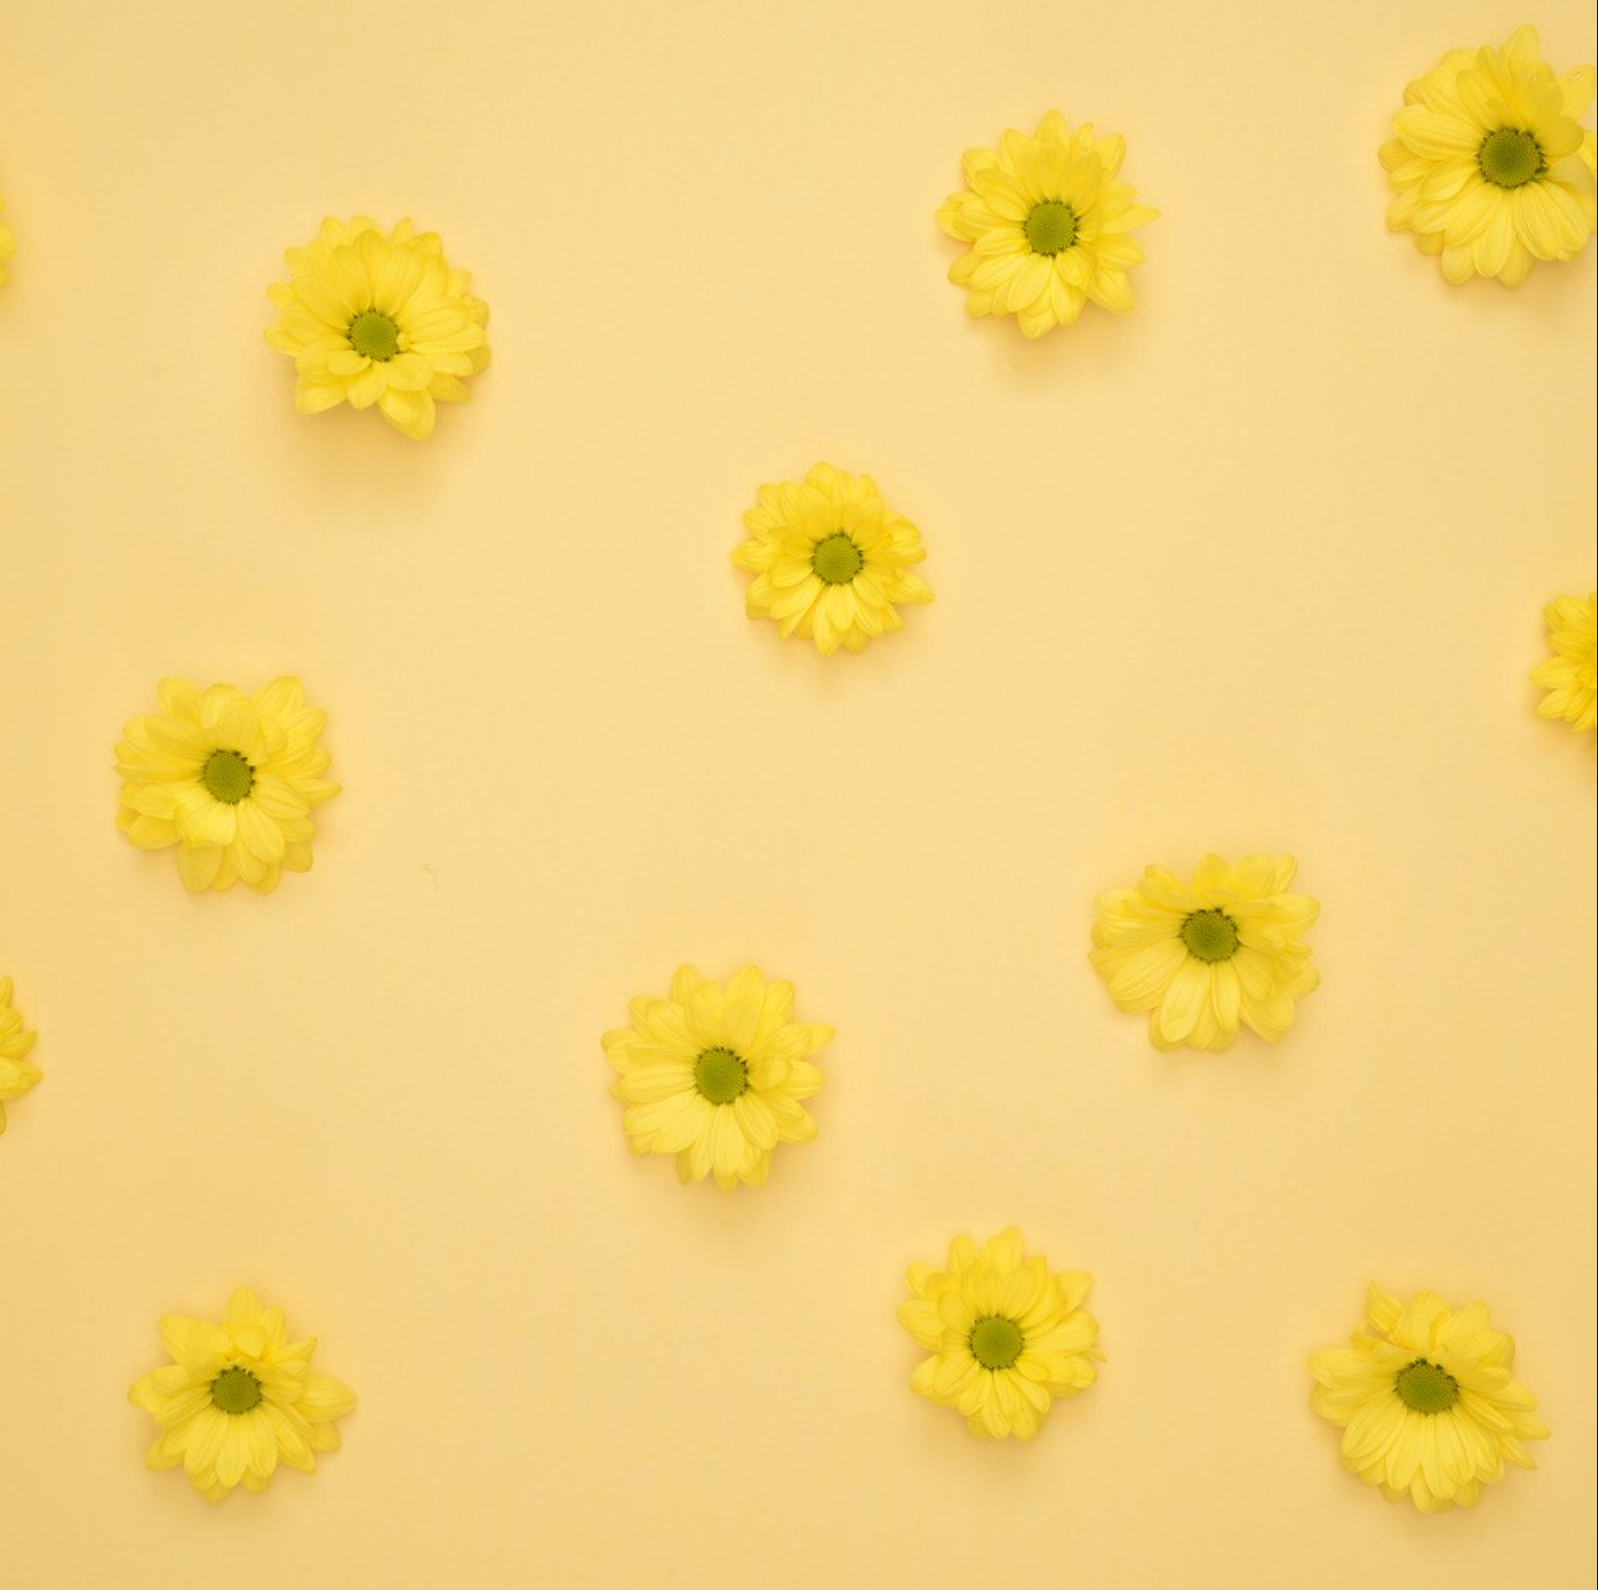 Yellow flower themed cover photo